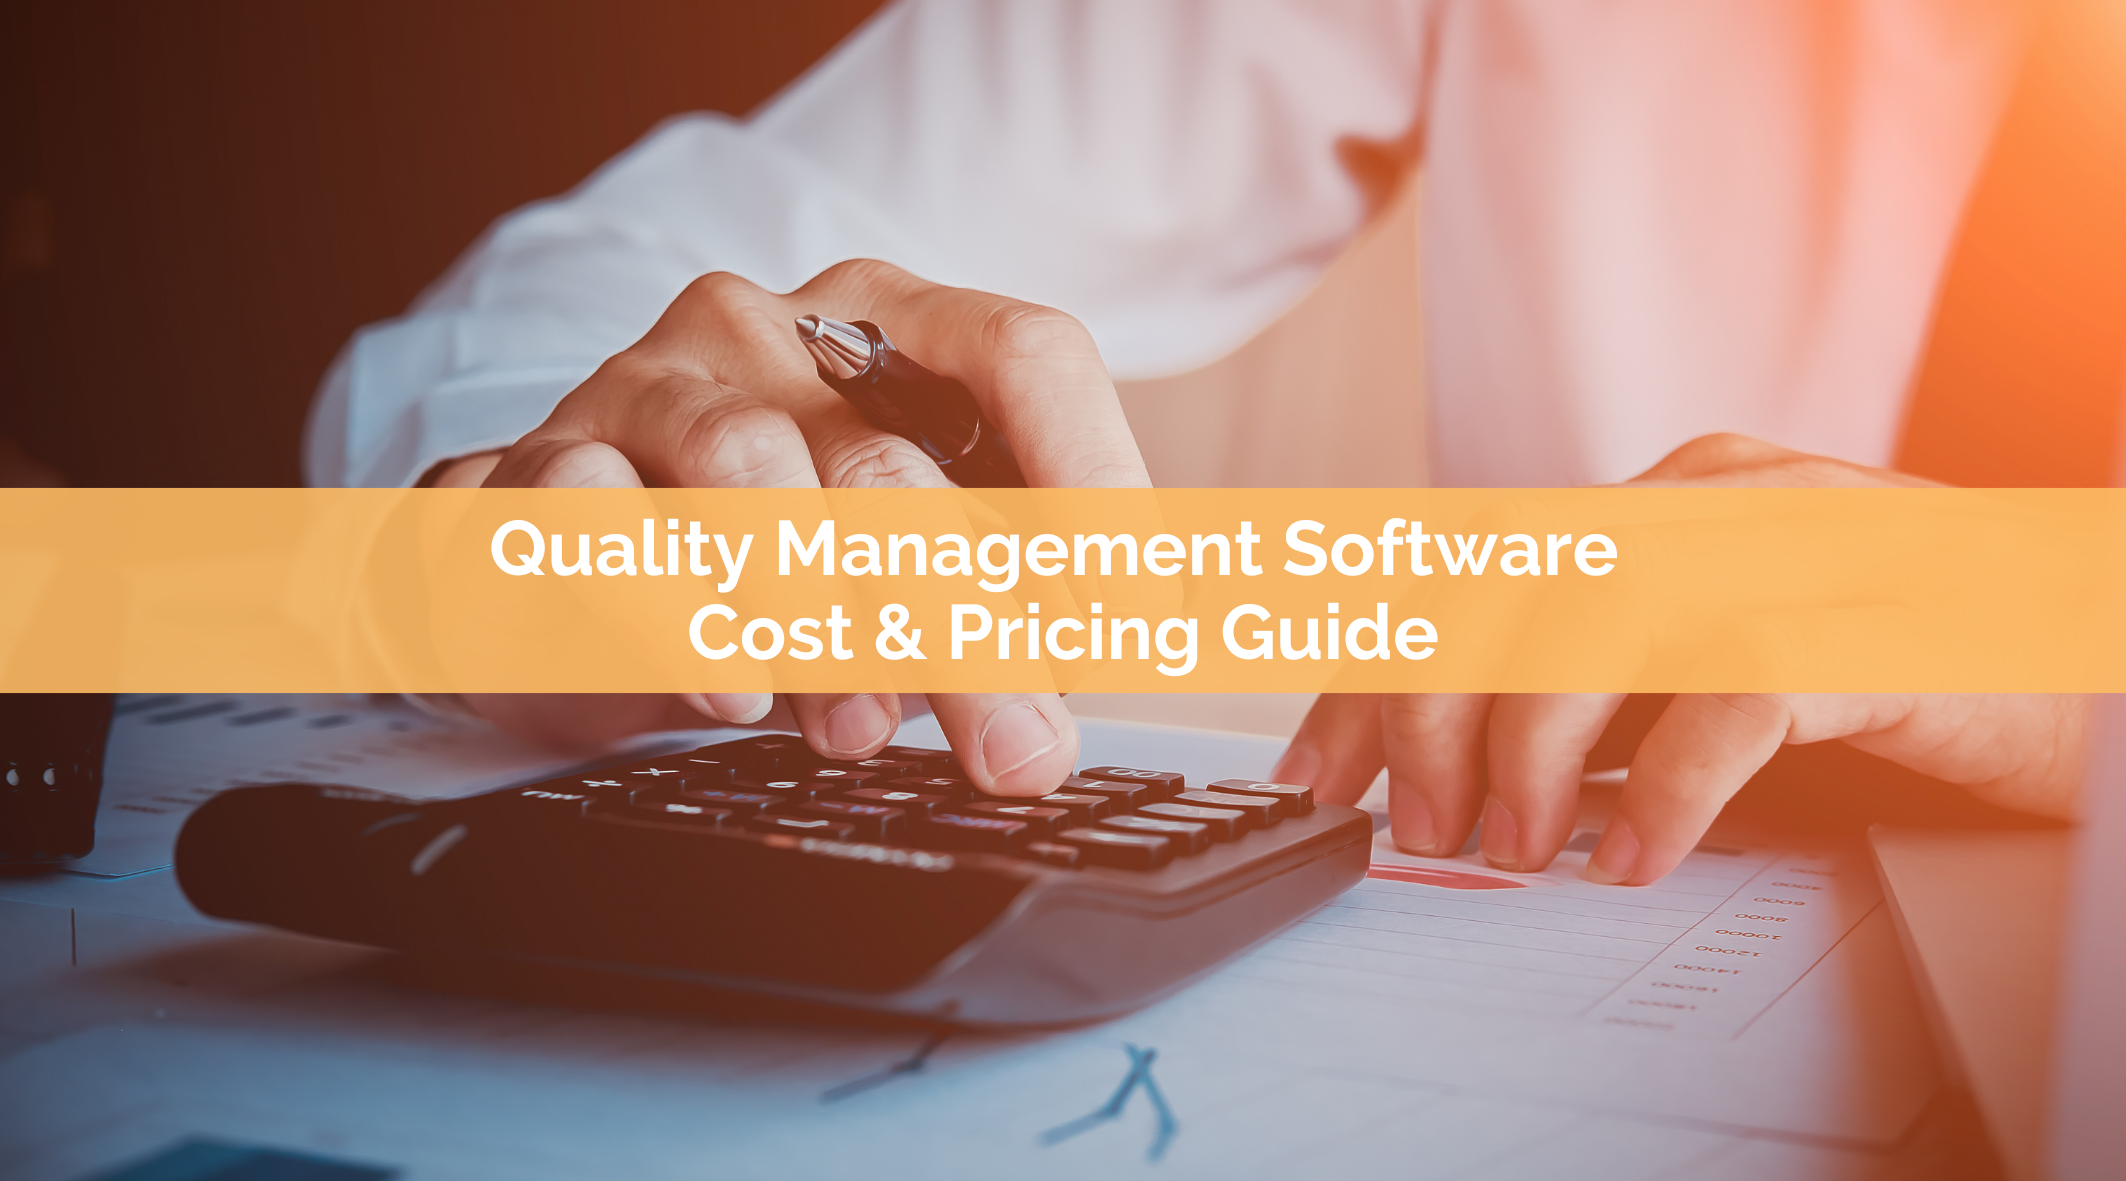 Quality Management Software (QMS) Cost & Pricing Guide